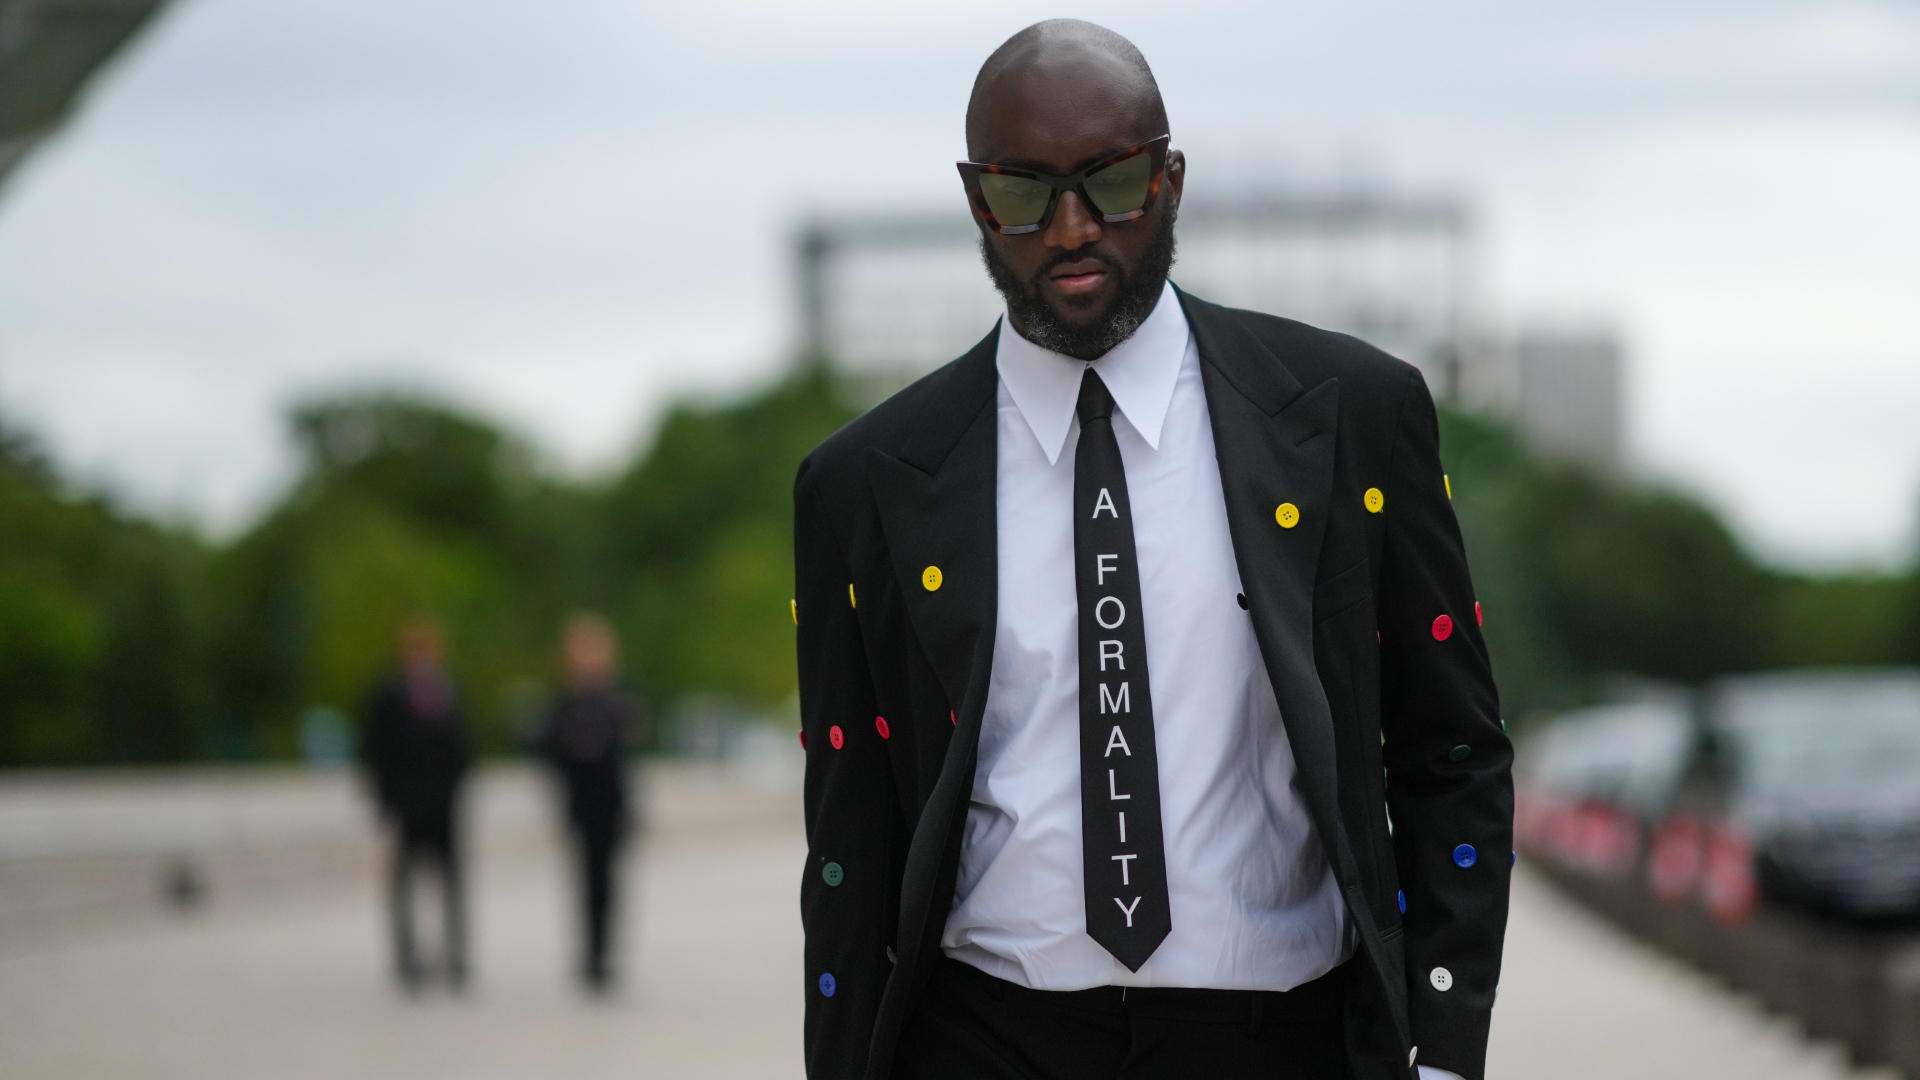 Watch Virgil Abloh's Entire Posthumous SS22 Collection in Miami